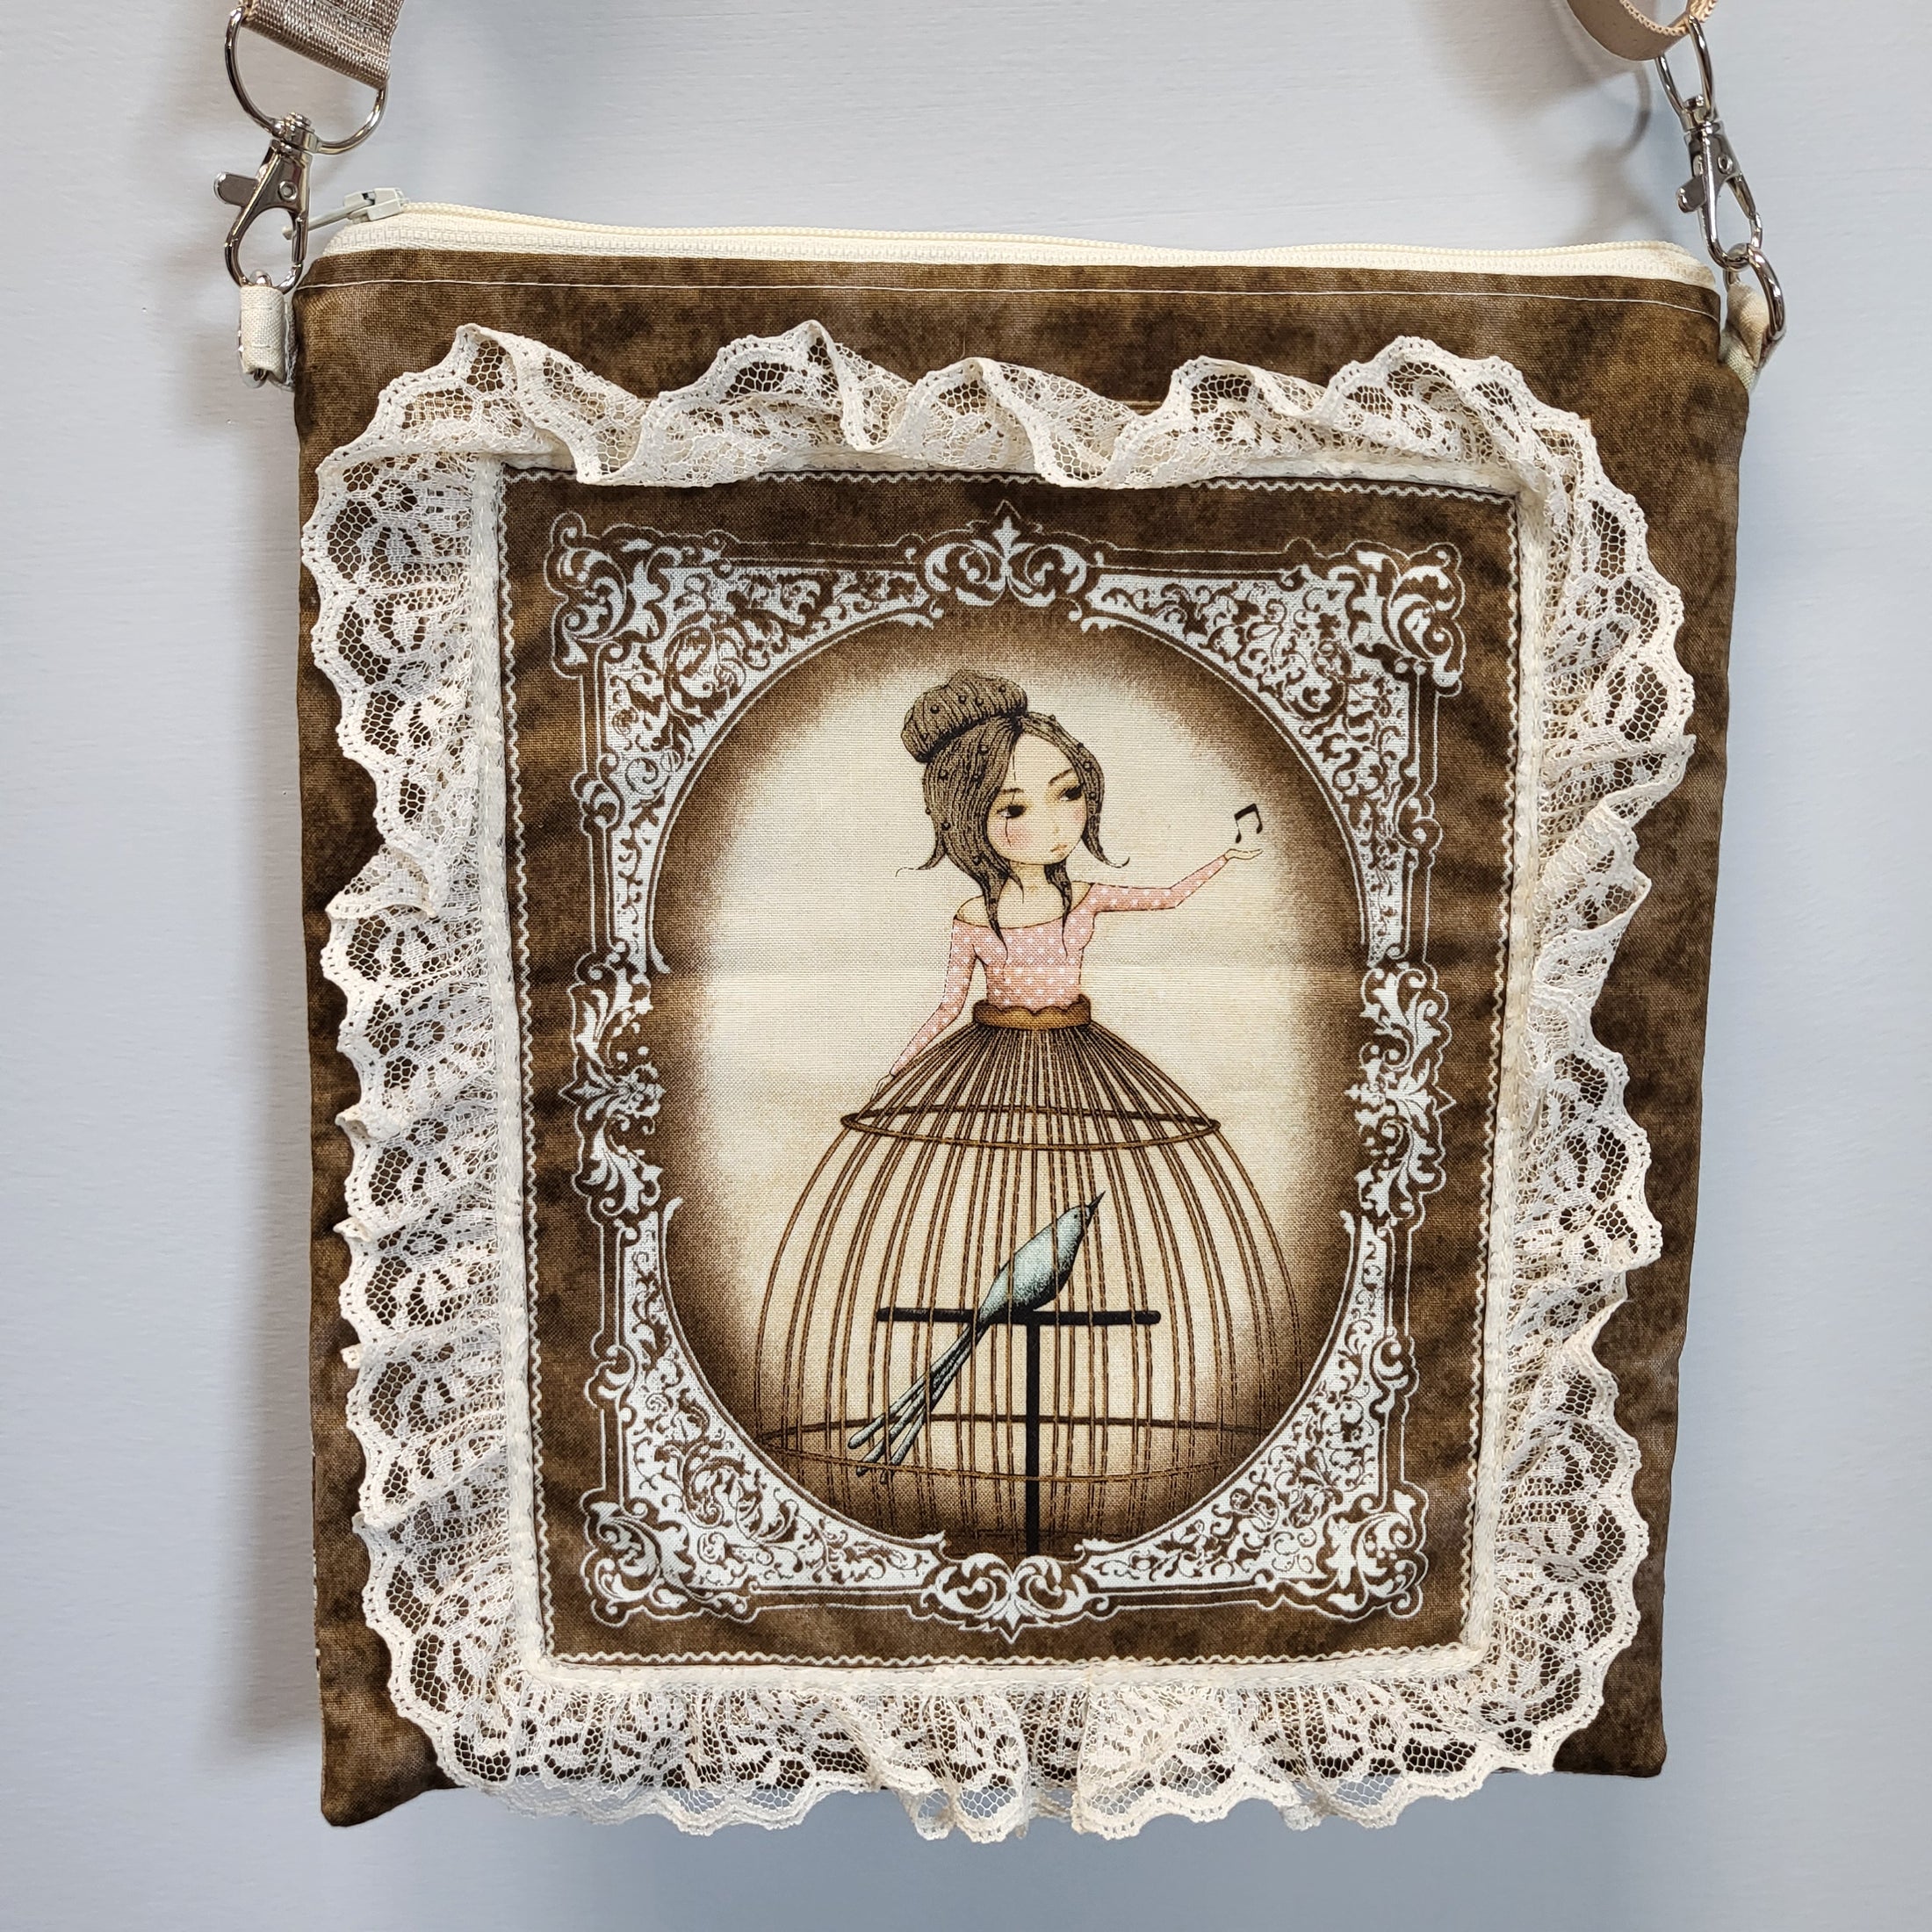 Close up view of the front of the purse with a lady wearing a birdcage skirt surrounded by lace. 